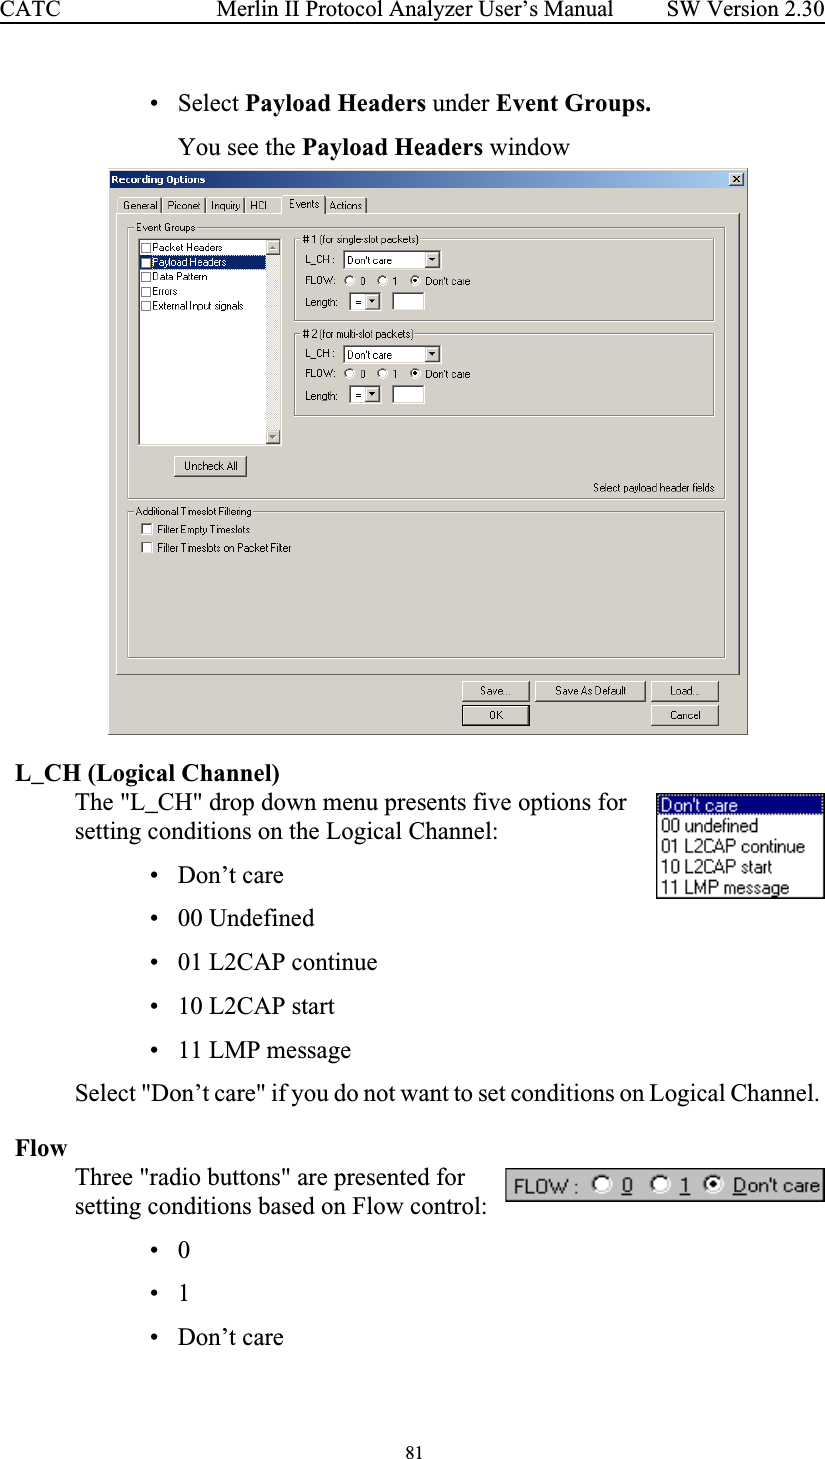  81 Merlin II Protocol Analyzer User’s ManualCATC SW Version 2.30• Select Payload Headers under Event Groups.You see the Payload Headers windowL_CH (Logical Channel)The &quot;L_CH&quot; drop down menu presents five options for setting conditions on the Logical Channel:  • Don’t care• 00 Undefined• 01 L2CAP continue• 10 L2CAP start• 11 LMP messageSelect &quot;Don’t care&quot; if you do not want to set conditions on Logical Channel. FlowThree &quot;radio buttons&quot; are presented for setting conditions based on Flow control:•0•1• Don’t care